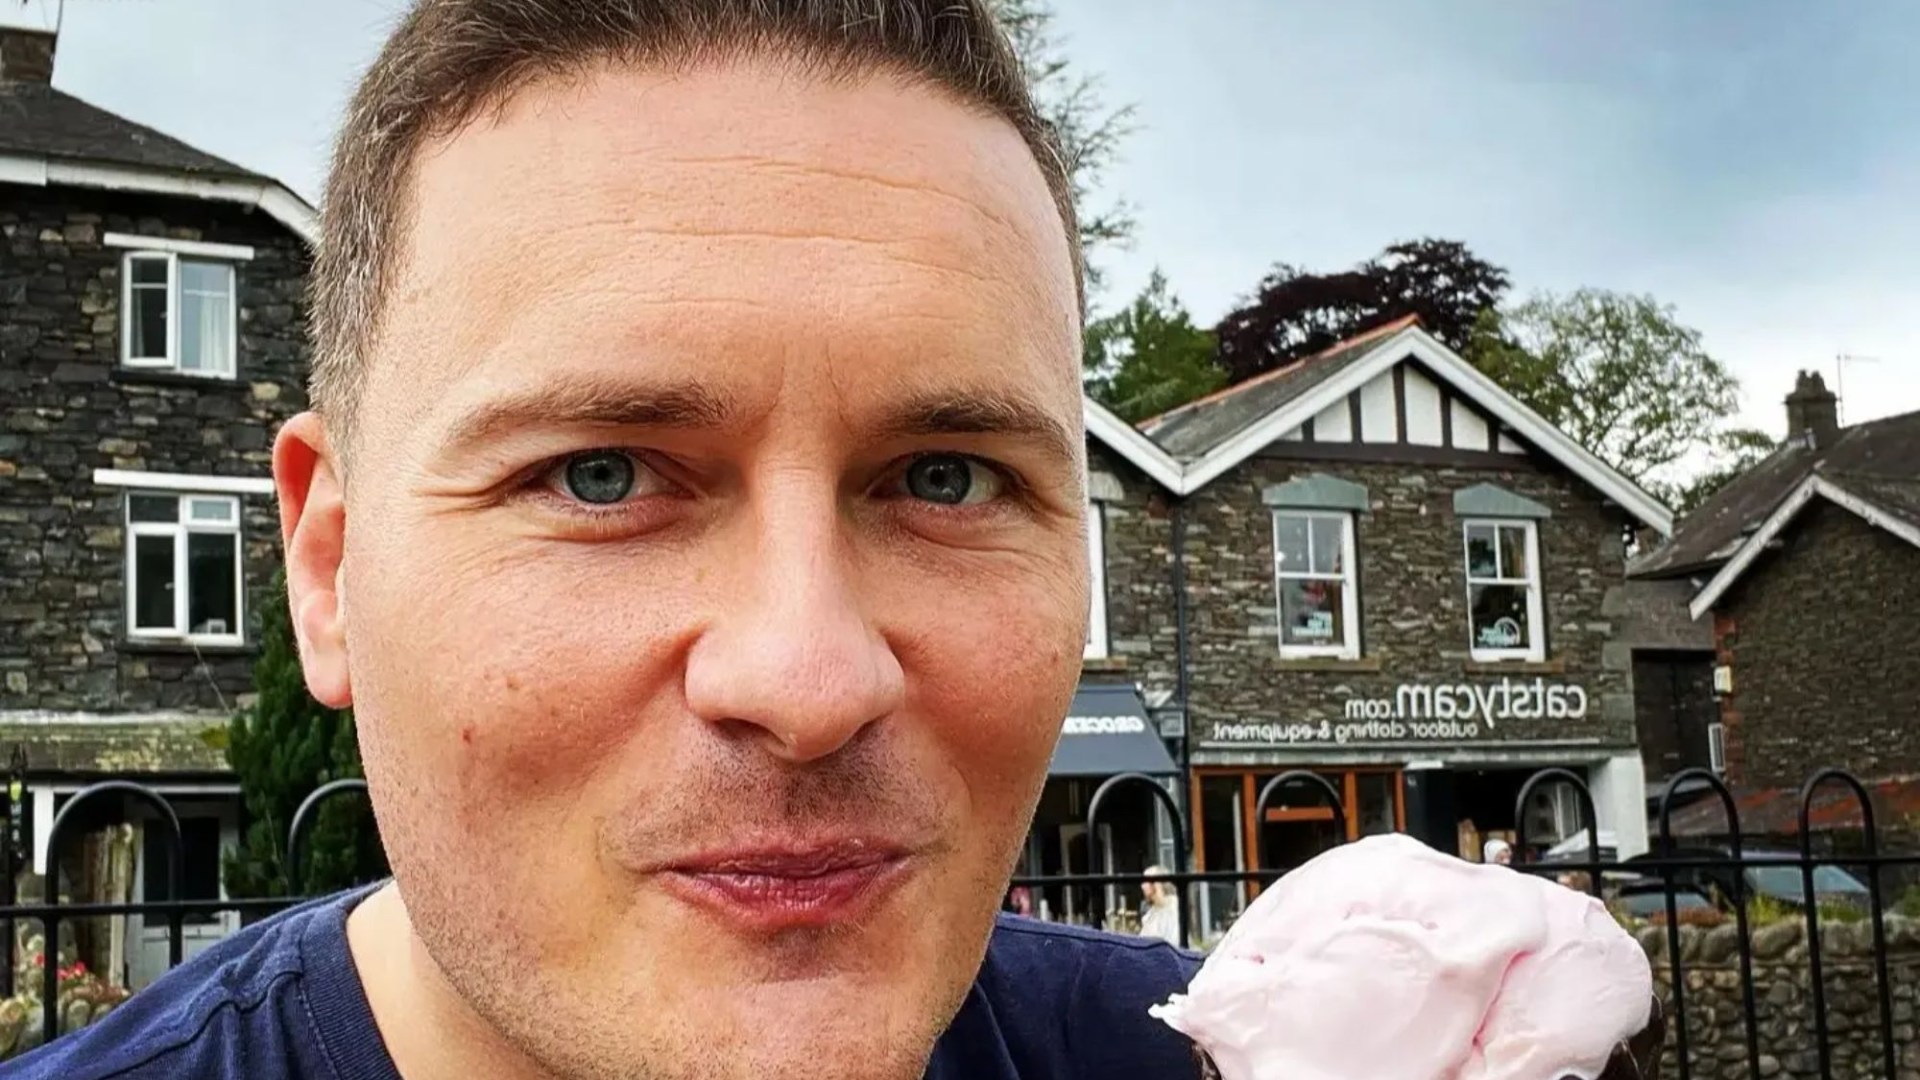 He survived cancer, his granddad was armed robber & hates woke ‘nonsense’ – now Wes Streeting is on mission to save NHS [Video]